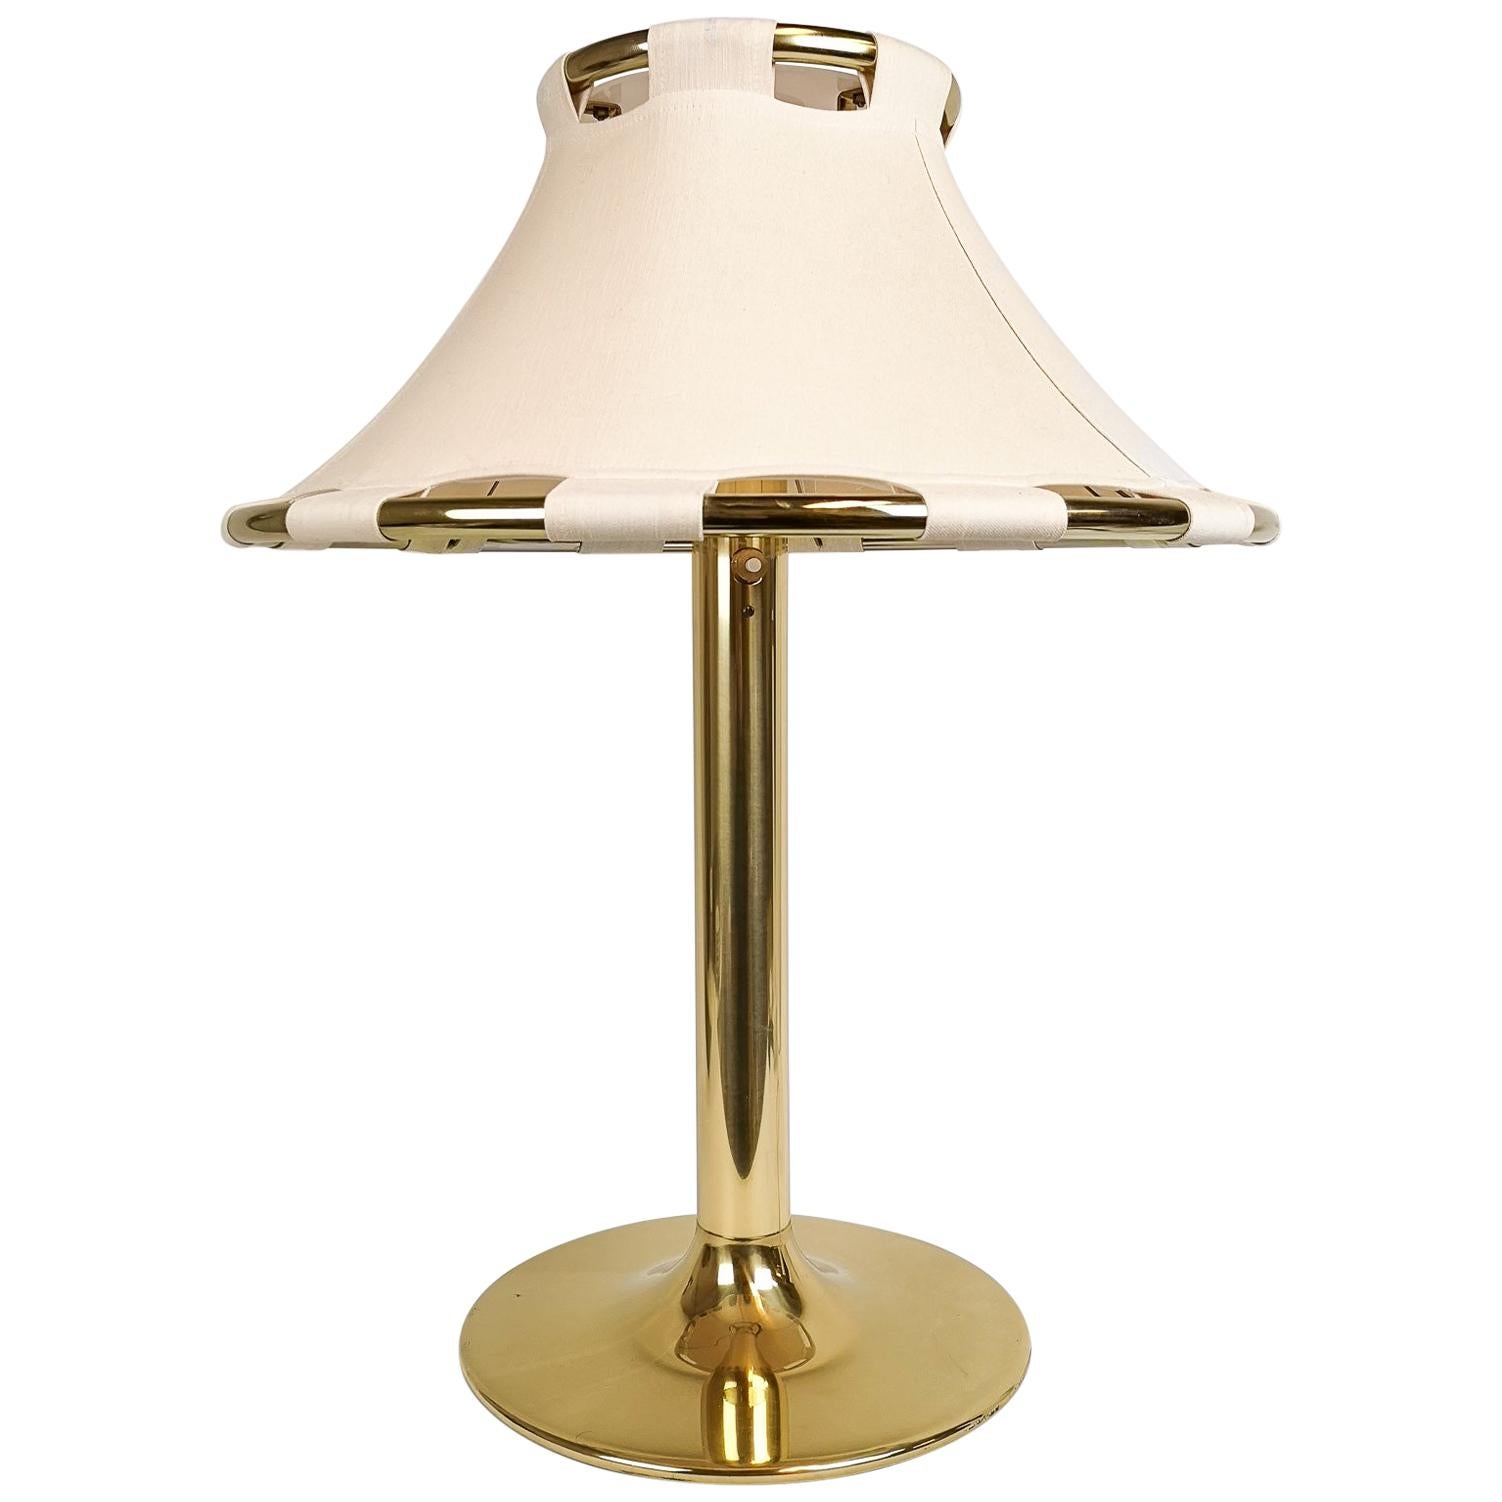 Midcentury Large Table Lamp "Anna" by Anna Ehrner for Ateljé Lyktan, 1970s